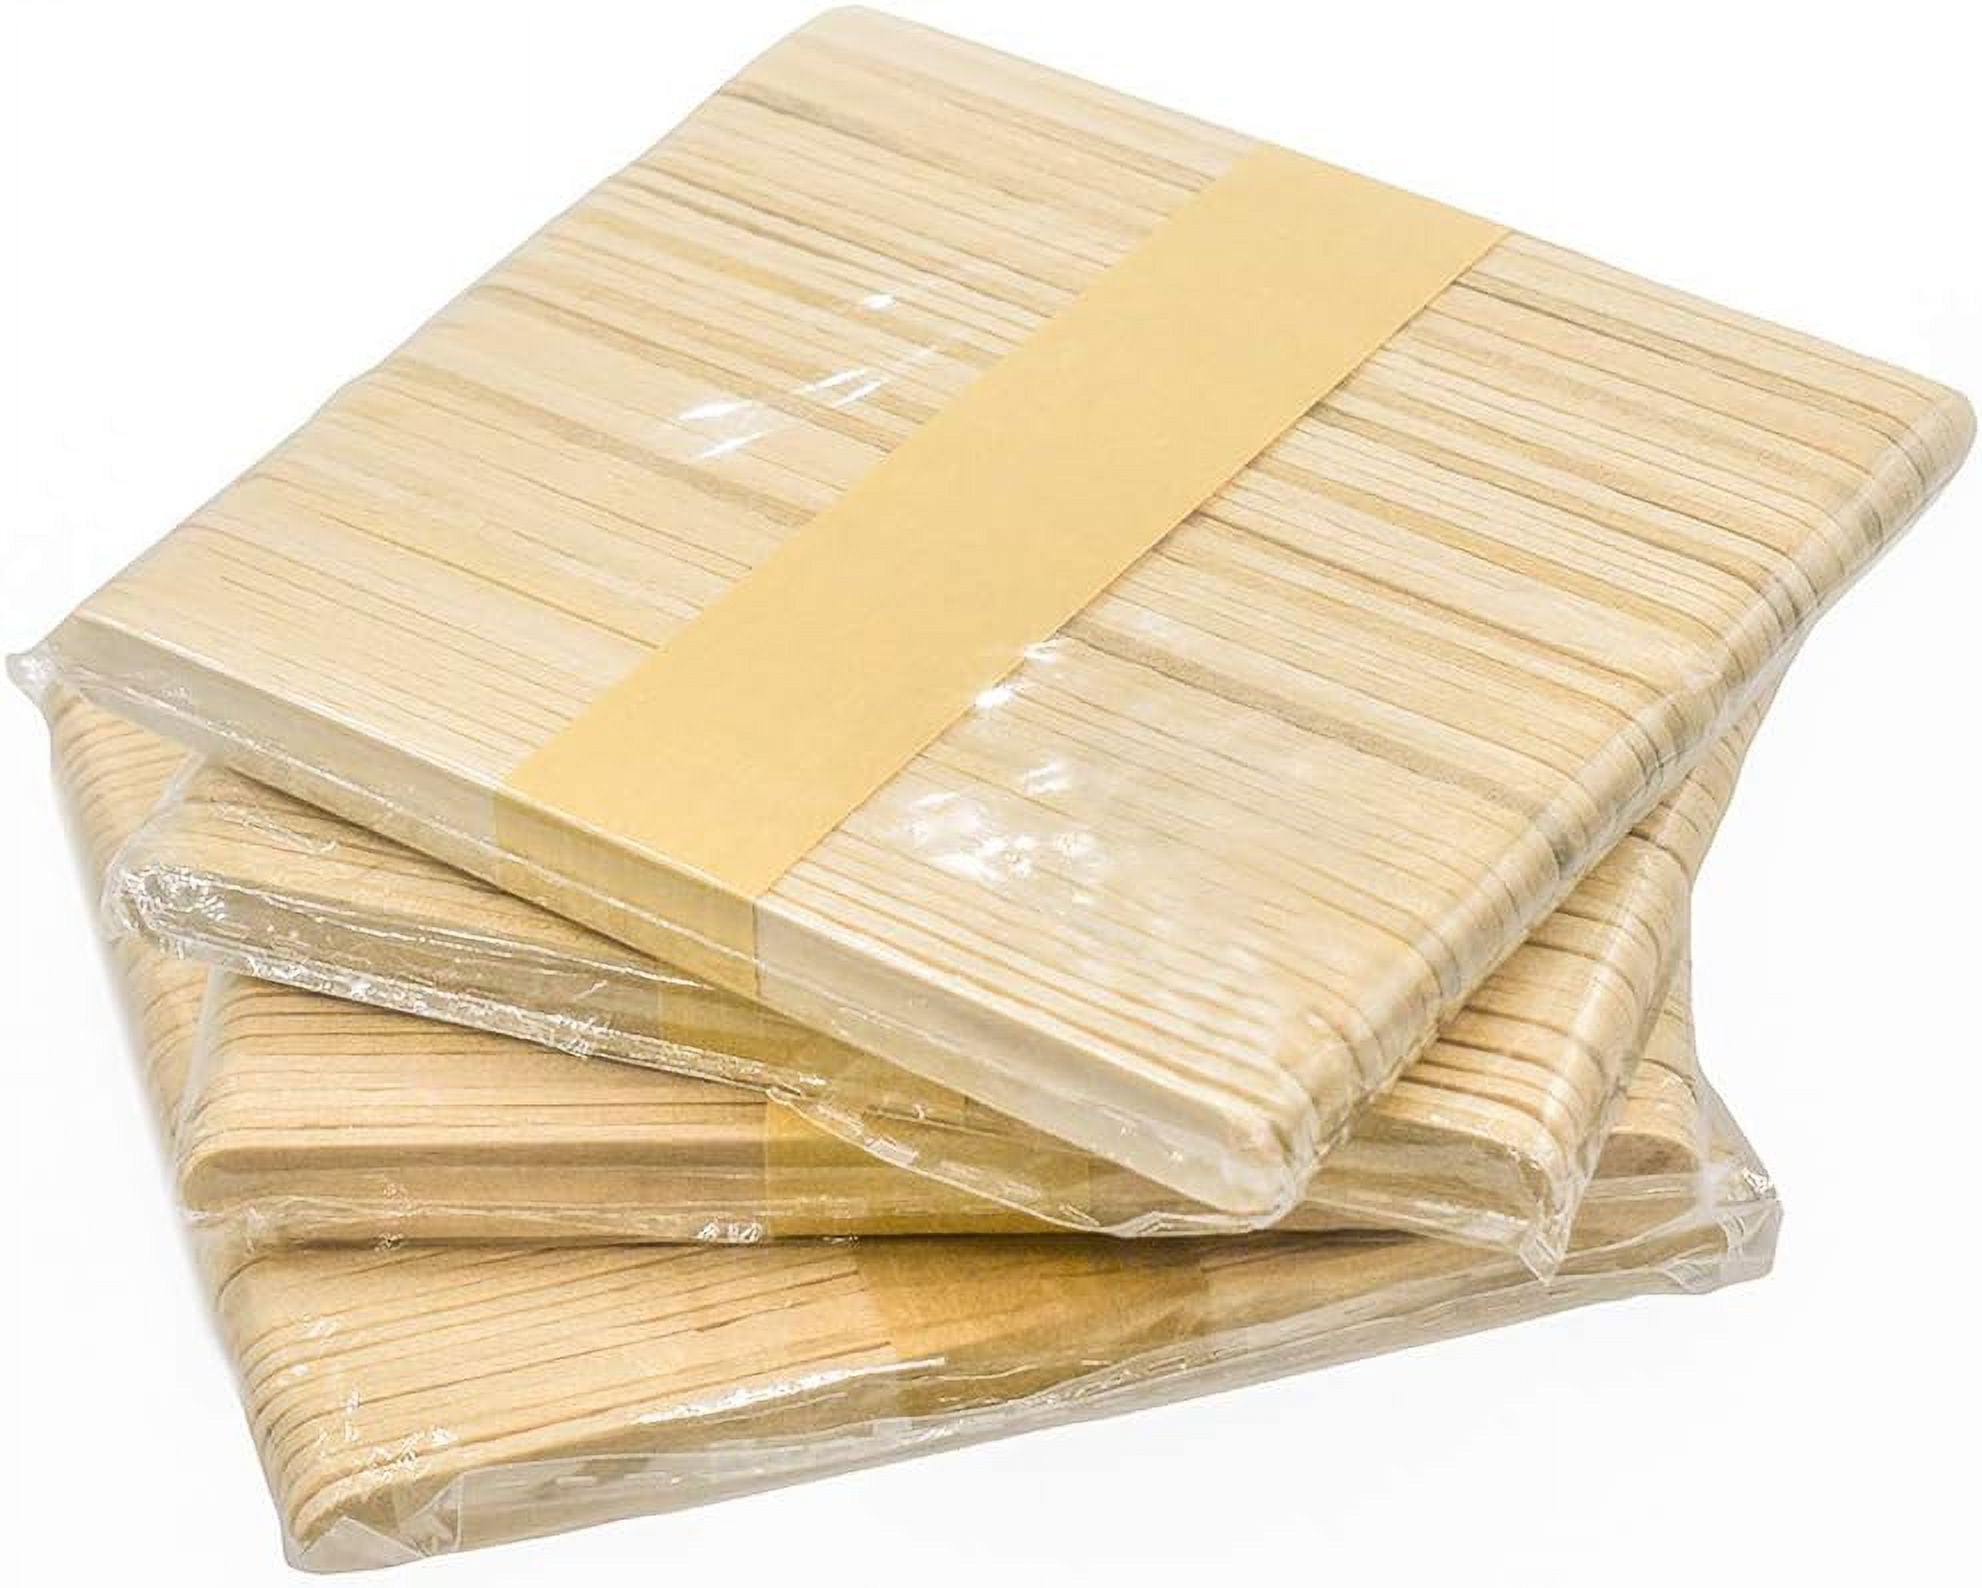 200 Natural Wood Craft, Popsicle Sticks for Crafts 4.5 Inch